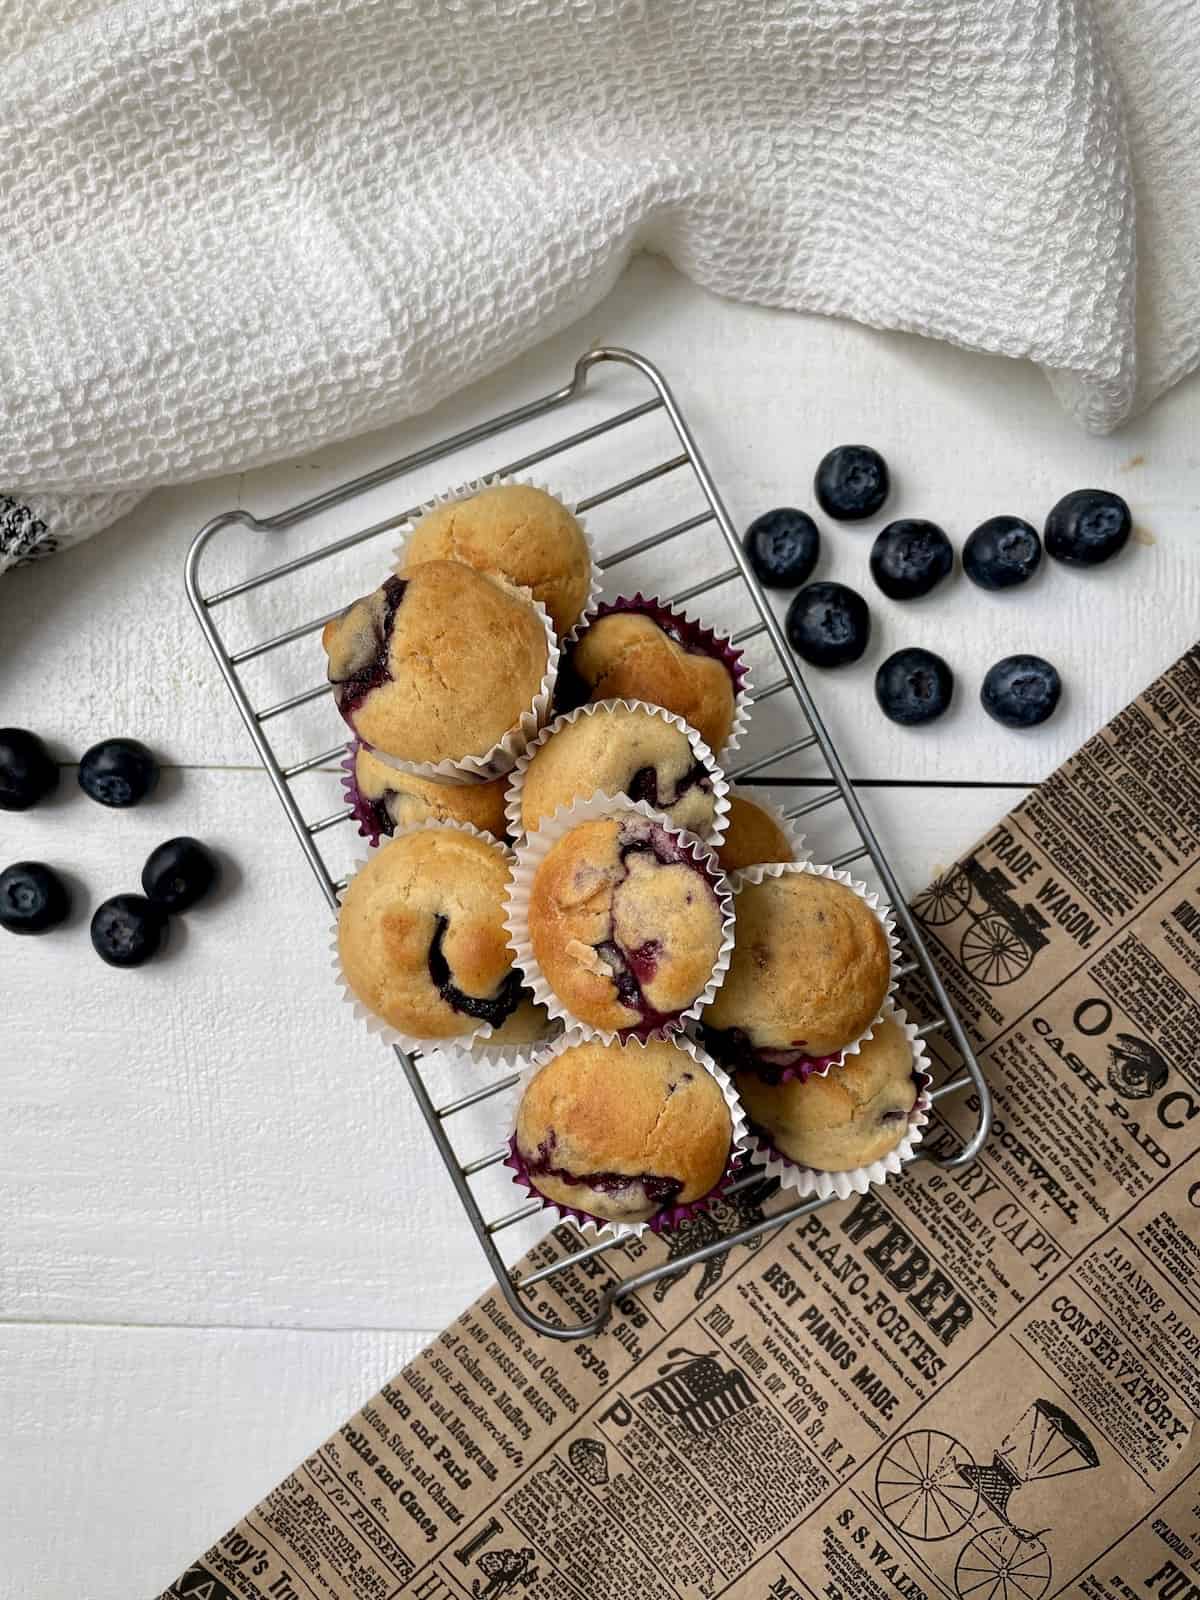 Blueberry muffins on a grate on a white table with newspaper and napkin.